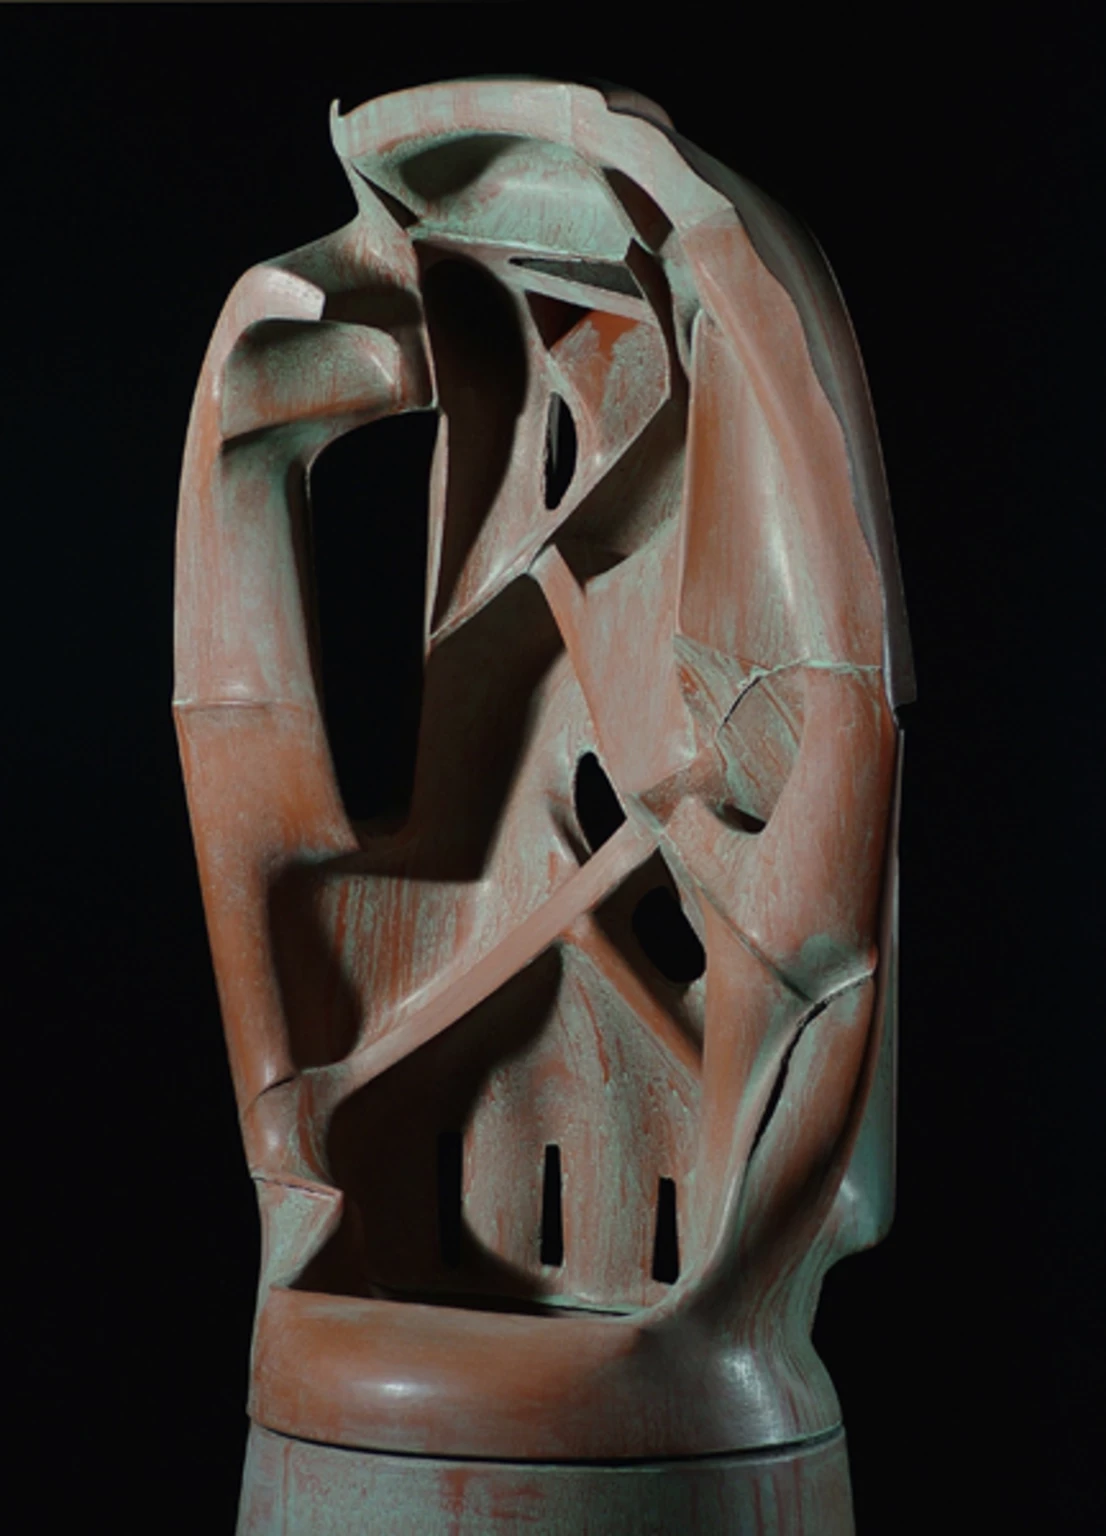 Weeping pair, 2007 - colored and painted concrete, 161 cm